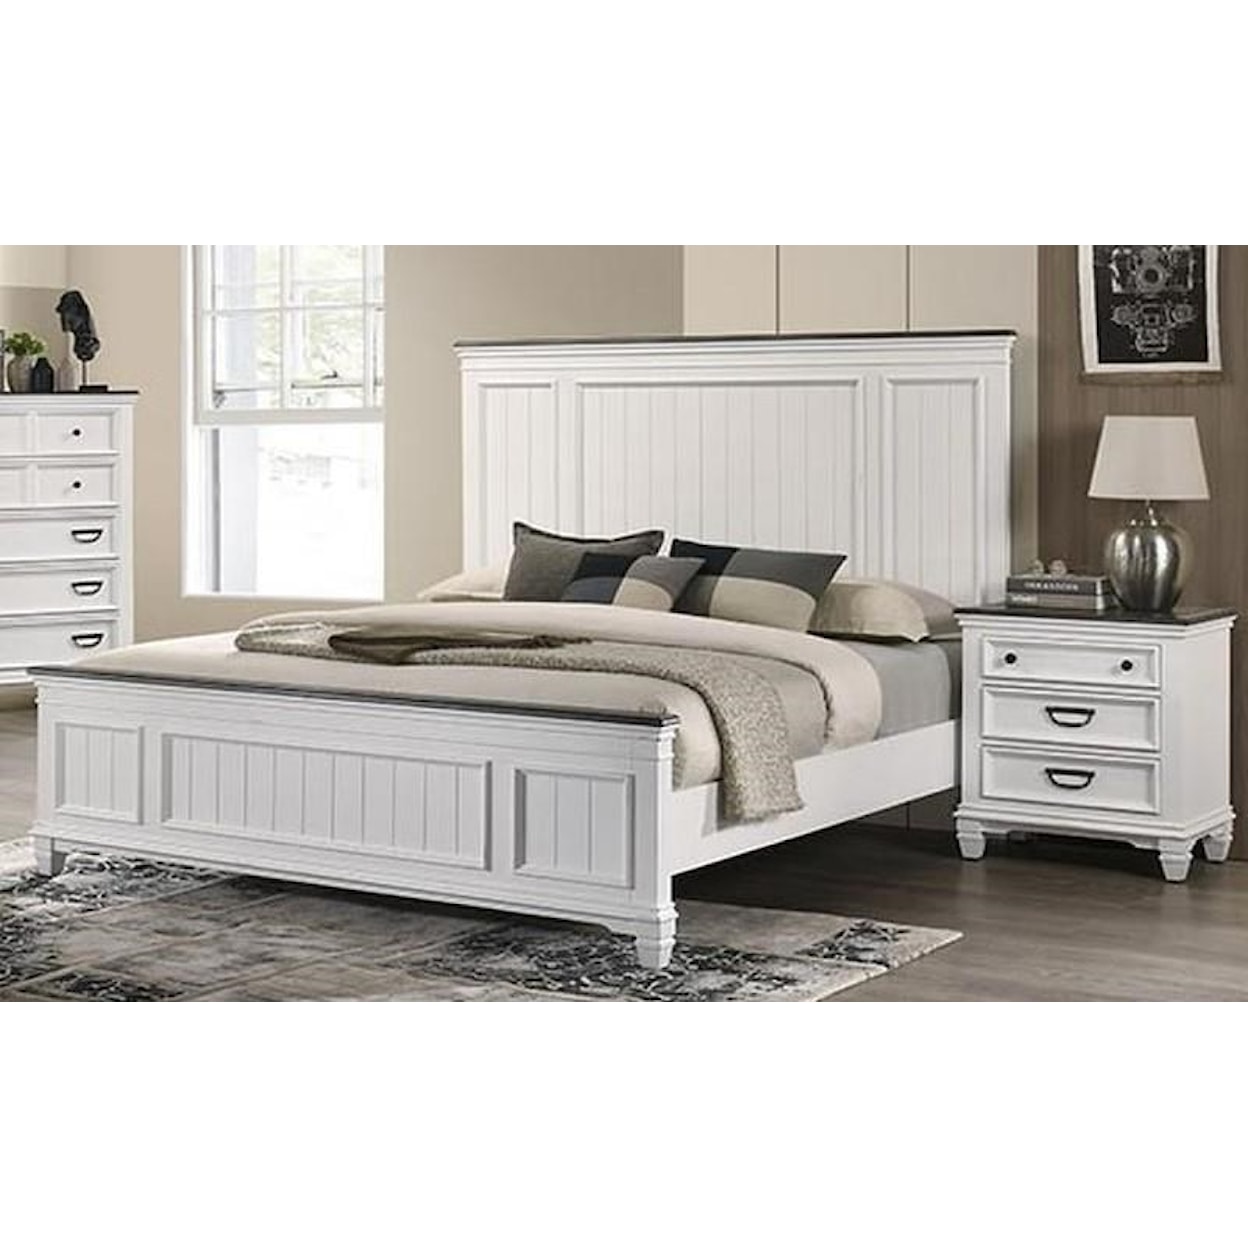 Lifestyle C8309A C8309A Queen Bed